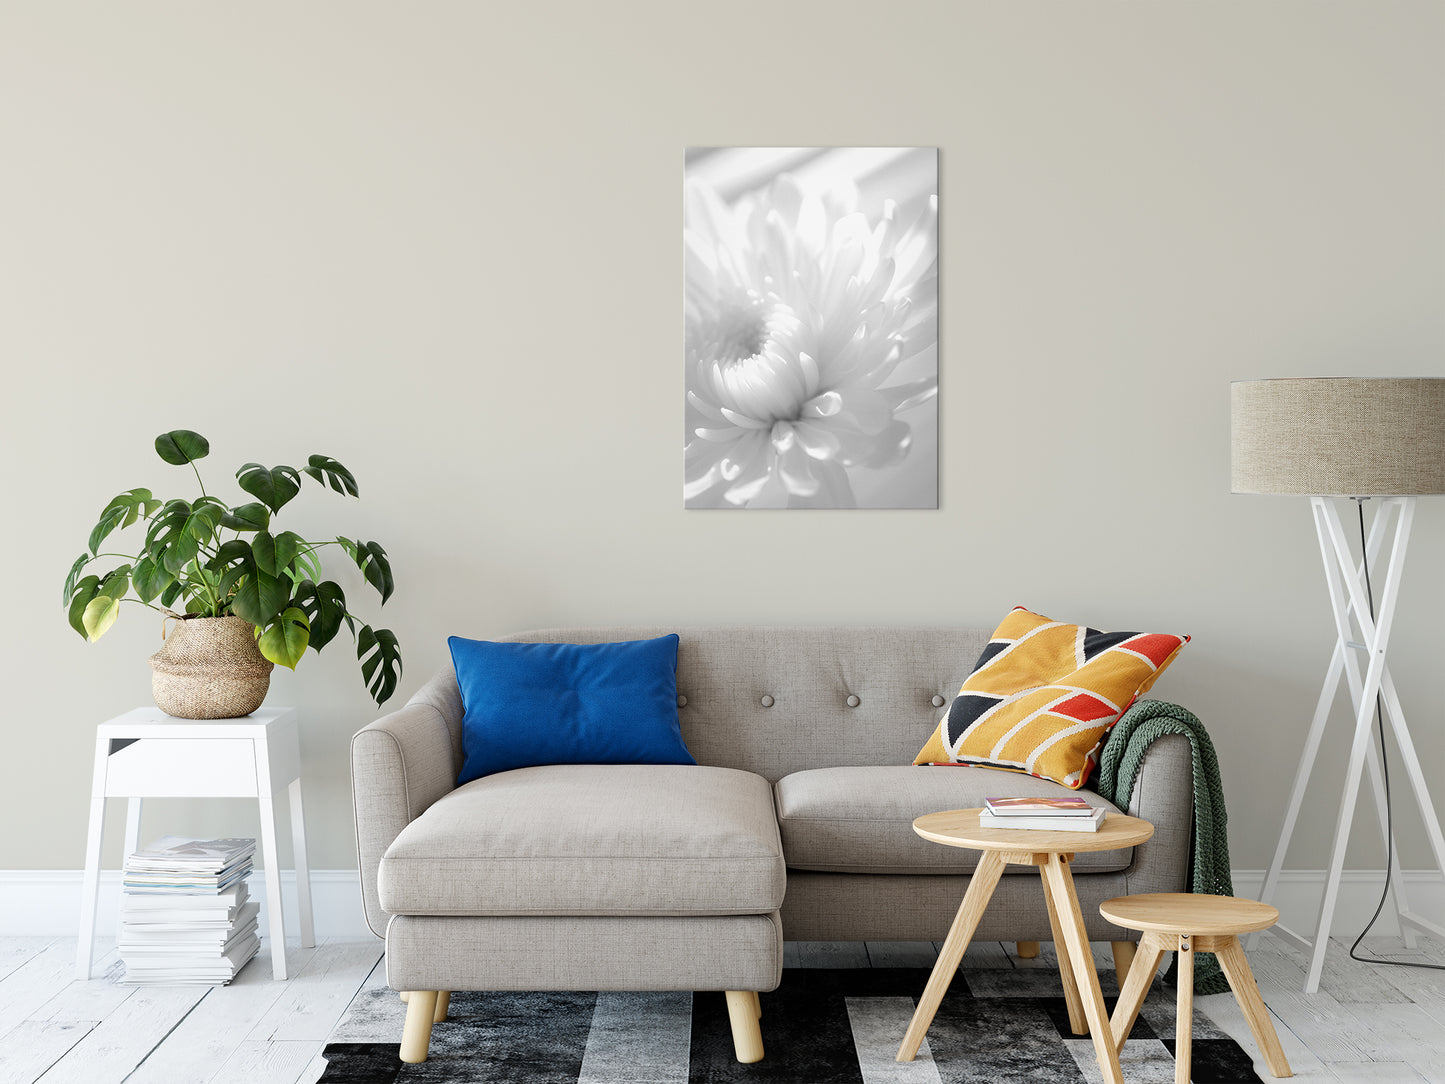 Infrared Flower Nature / Floral Photo Fine Art Canvas Wall Art Prints 24" x 36" - PIPAFINEART